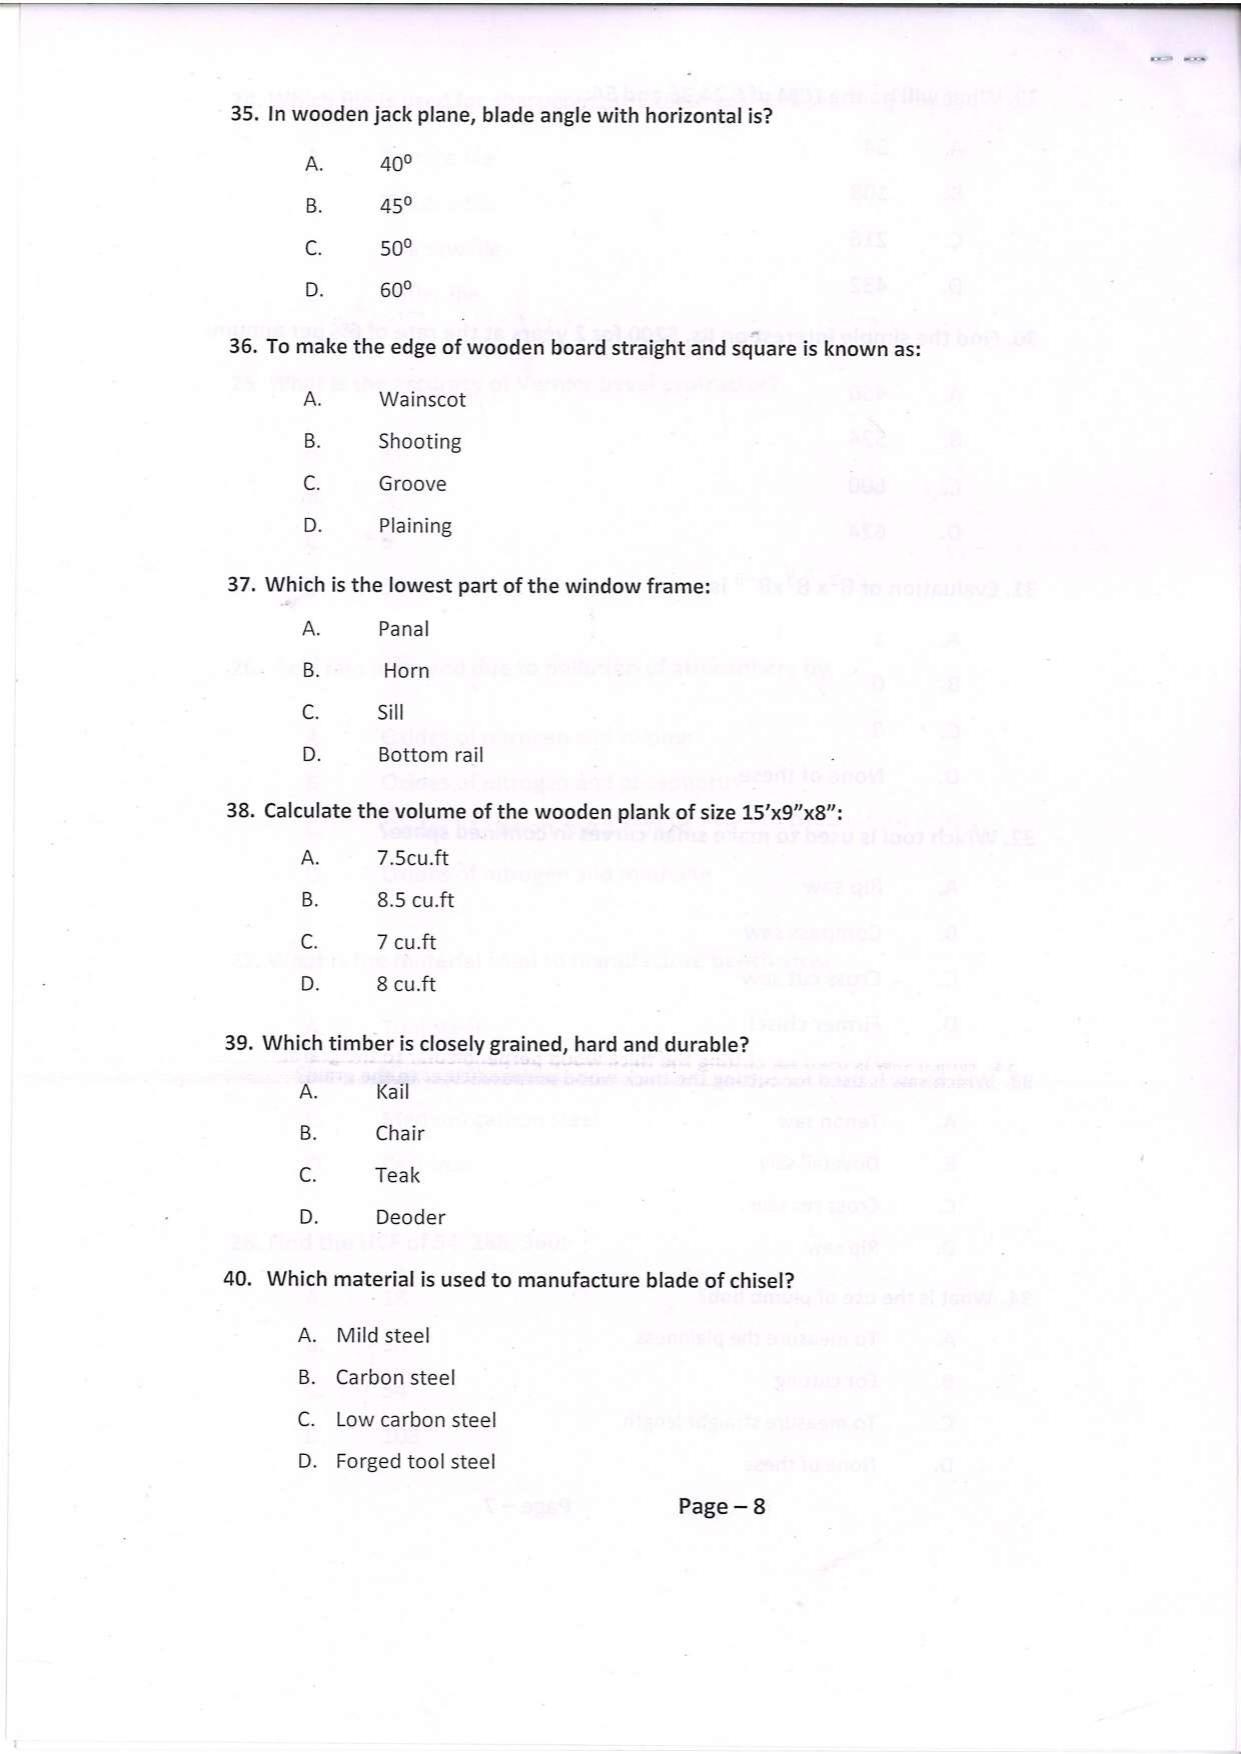 Question Paper of Technician ‘A’ (Carpentry) at BITM, Kolkata (Advertisement No. 4/2022) - Page 8